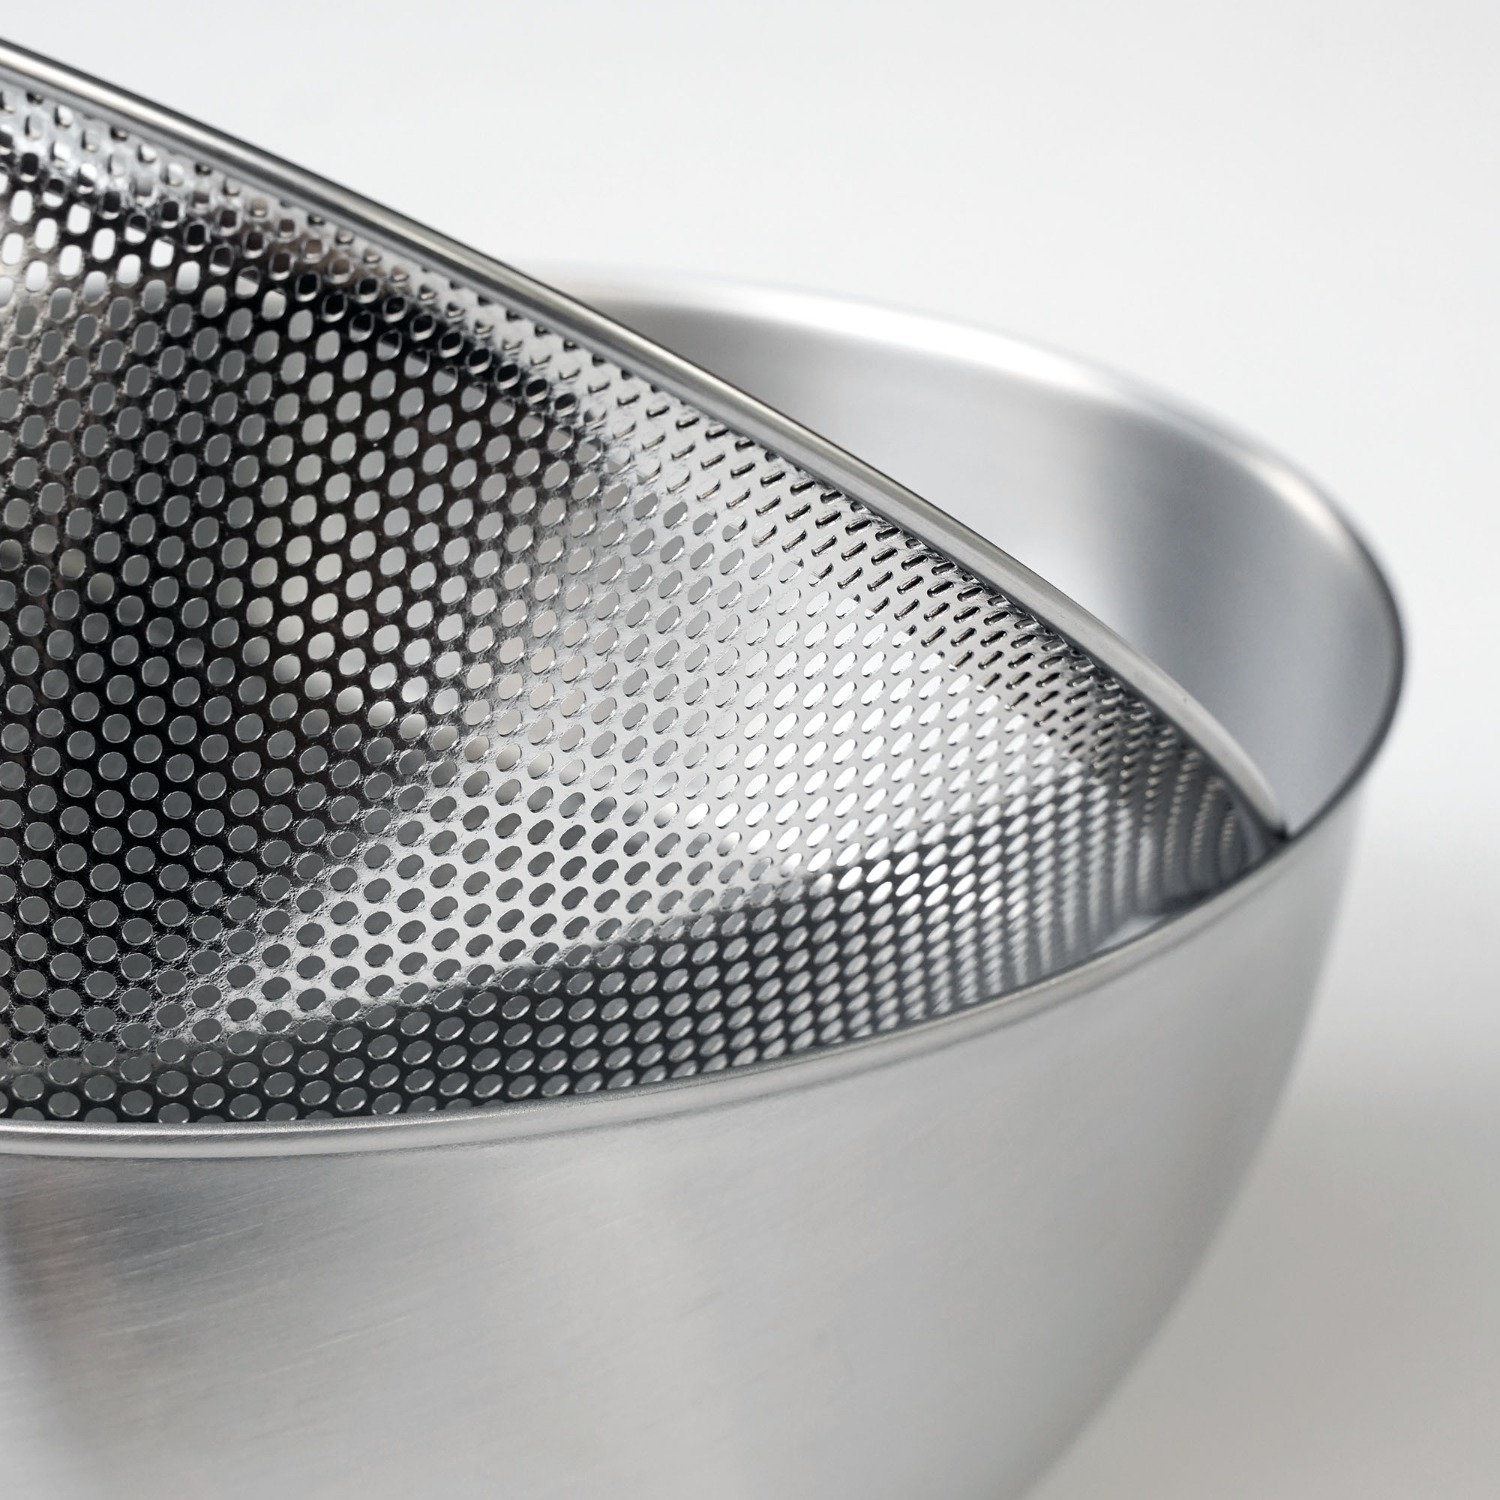 ﻿Stainless Steel Mixing Bowl